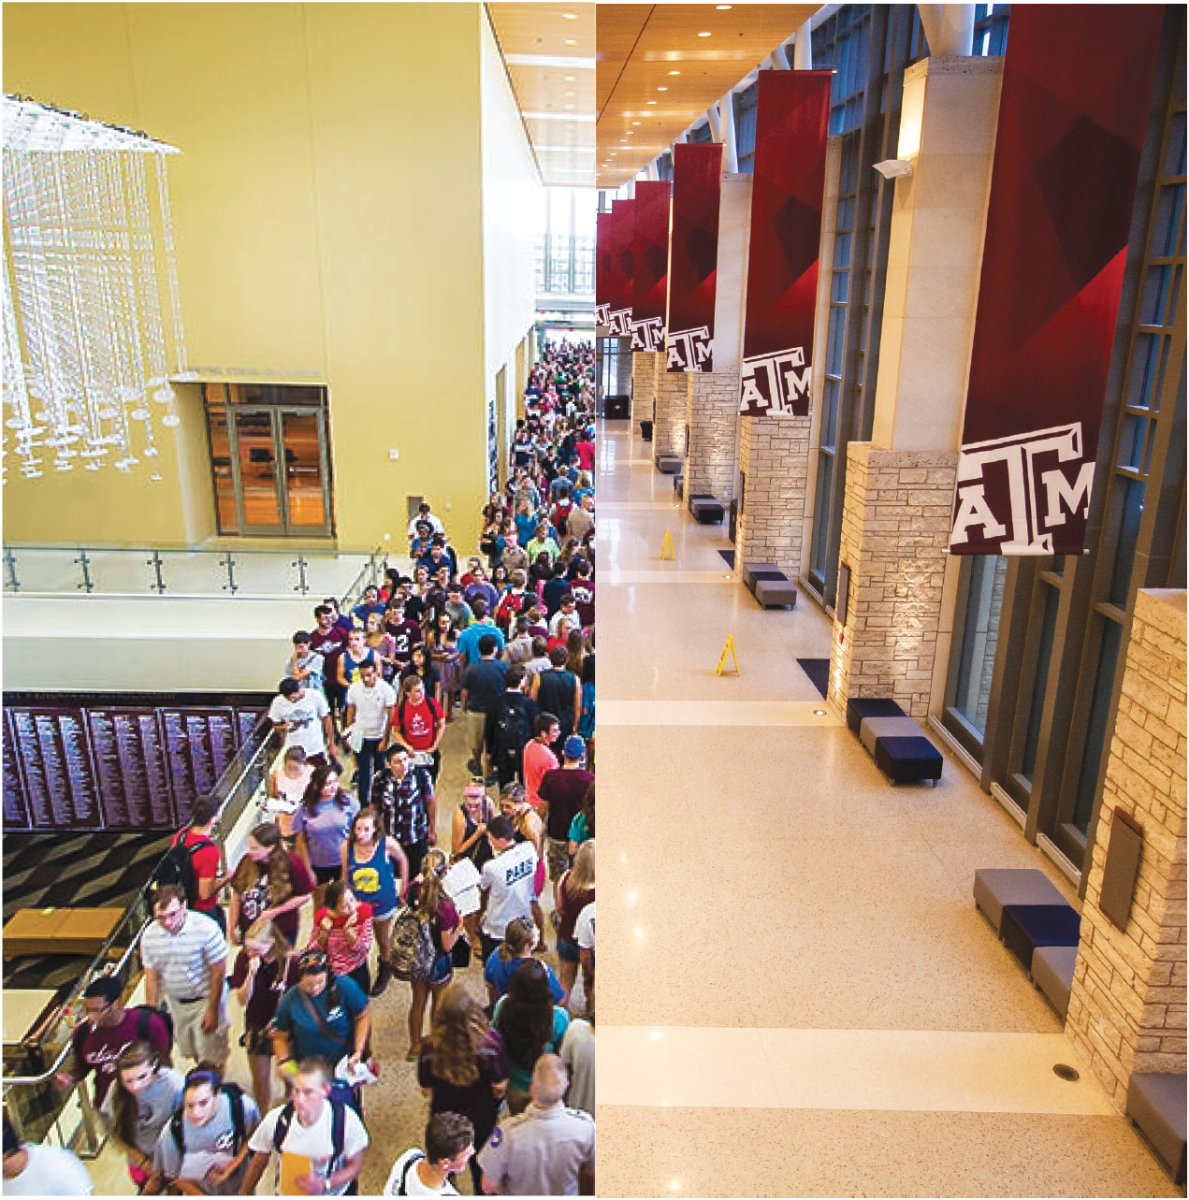 The MSC on its busiest day, MSC Open House, stands in stark contrast of the MSC after recent COVID-19 precautions have moved all A&M coursework to online-only instruction.